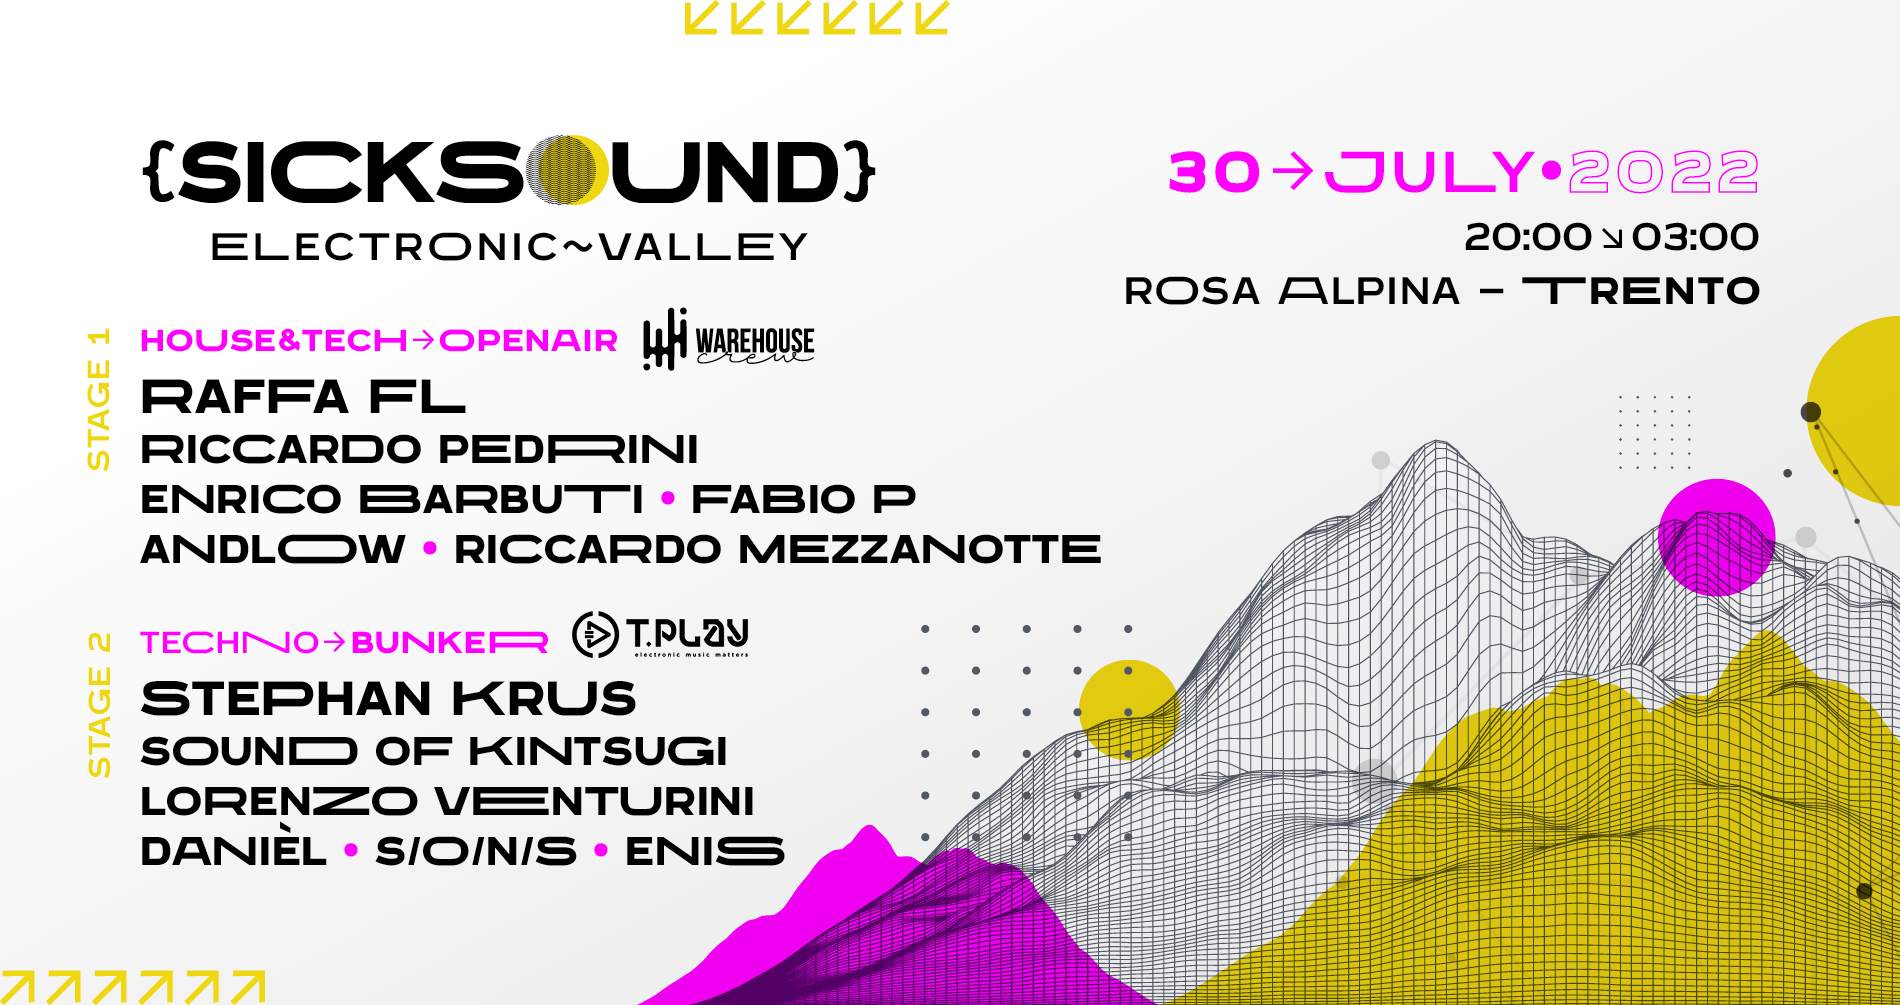 SICKSOUND Electronic Valley - 2 stage: House&tech Open Air + Techno Cave - フライヤー表